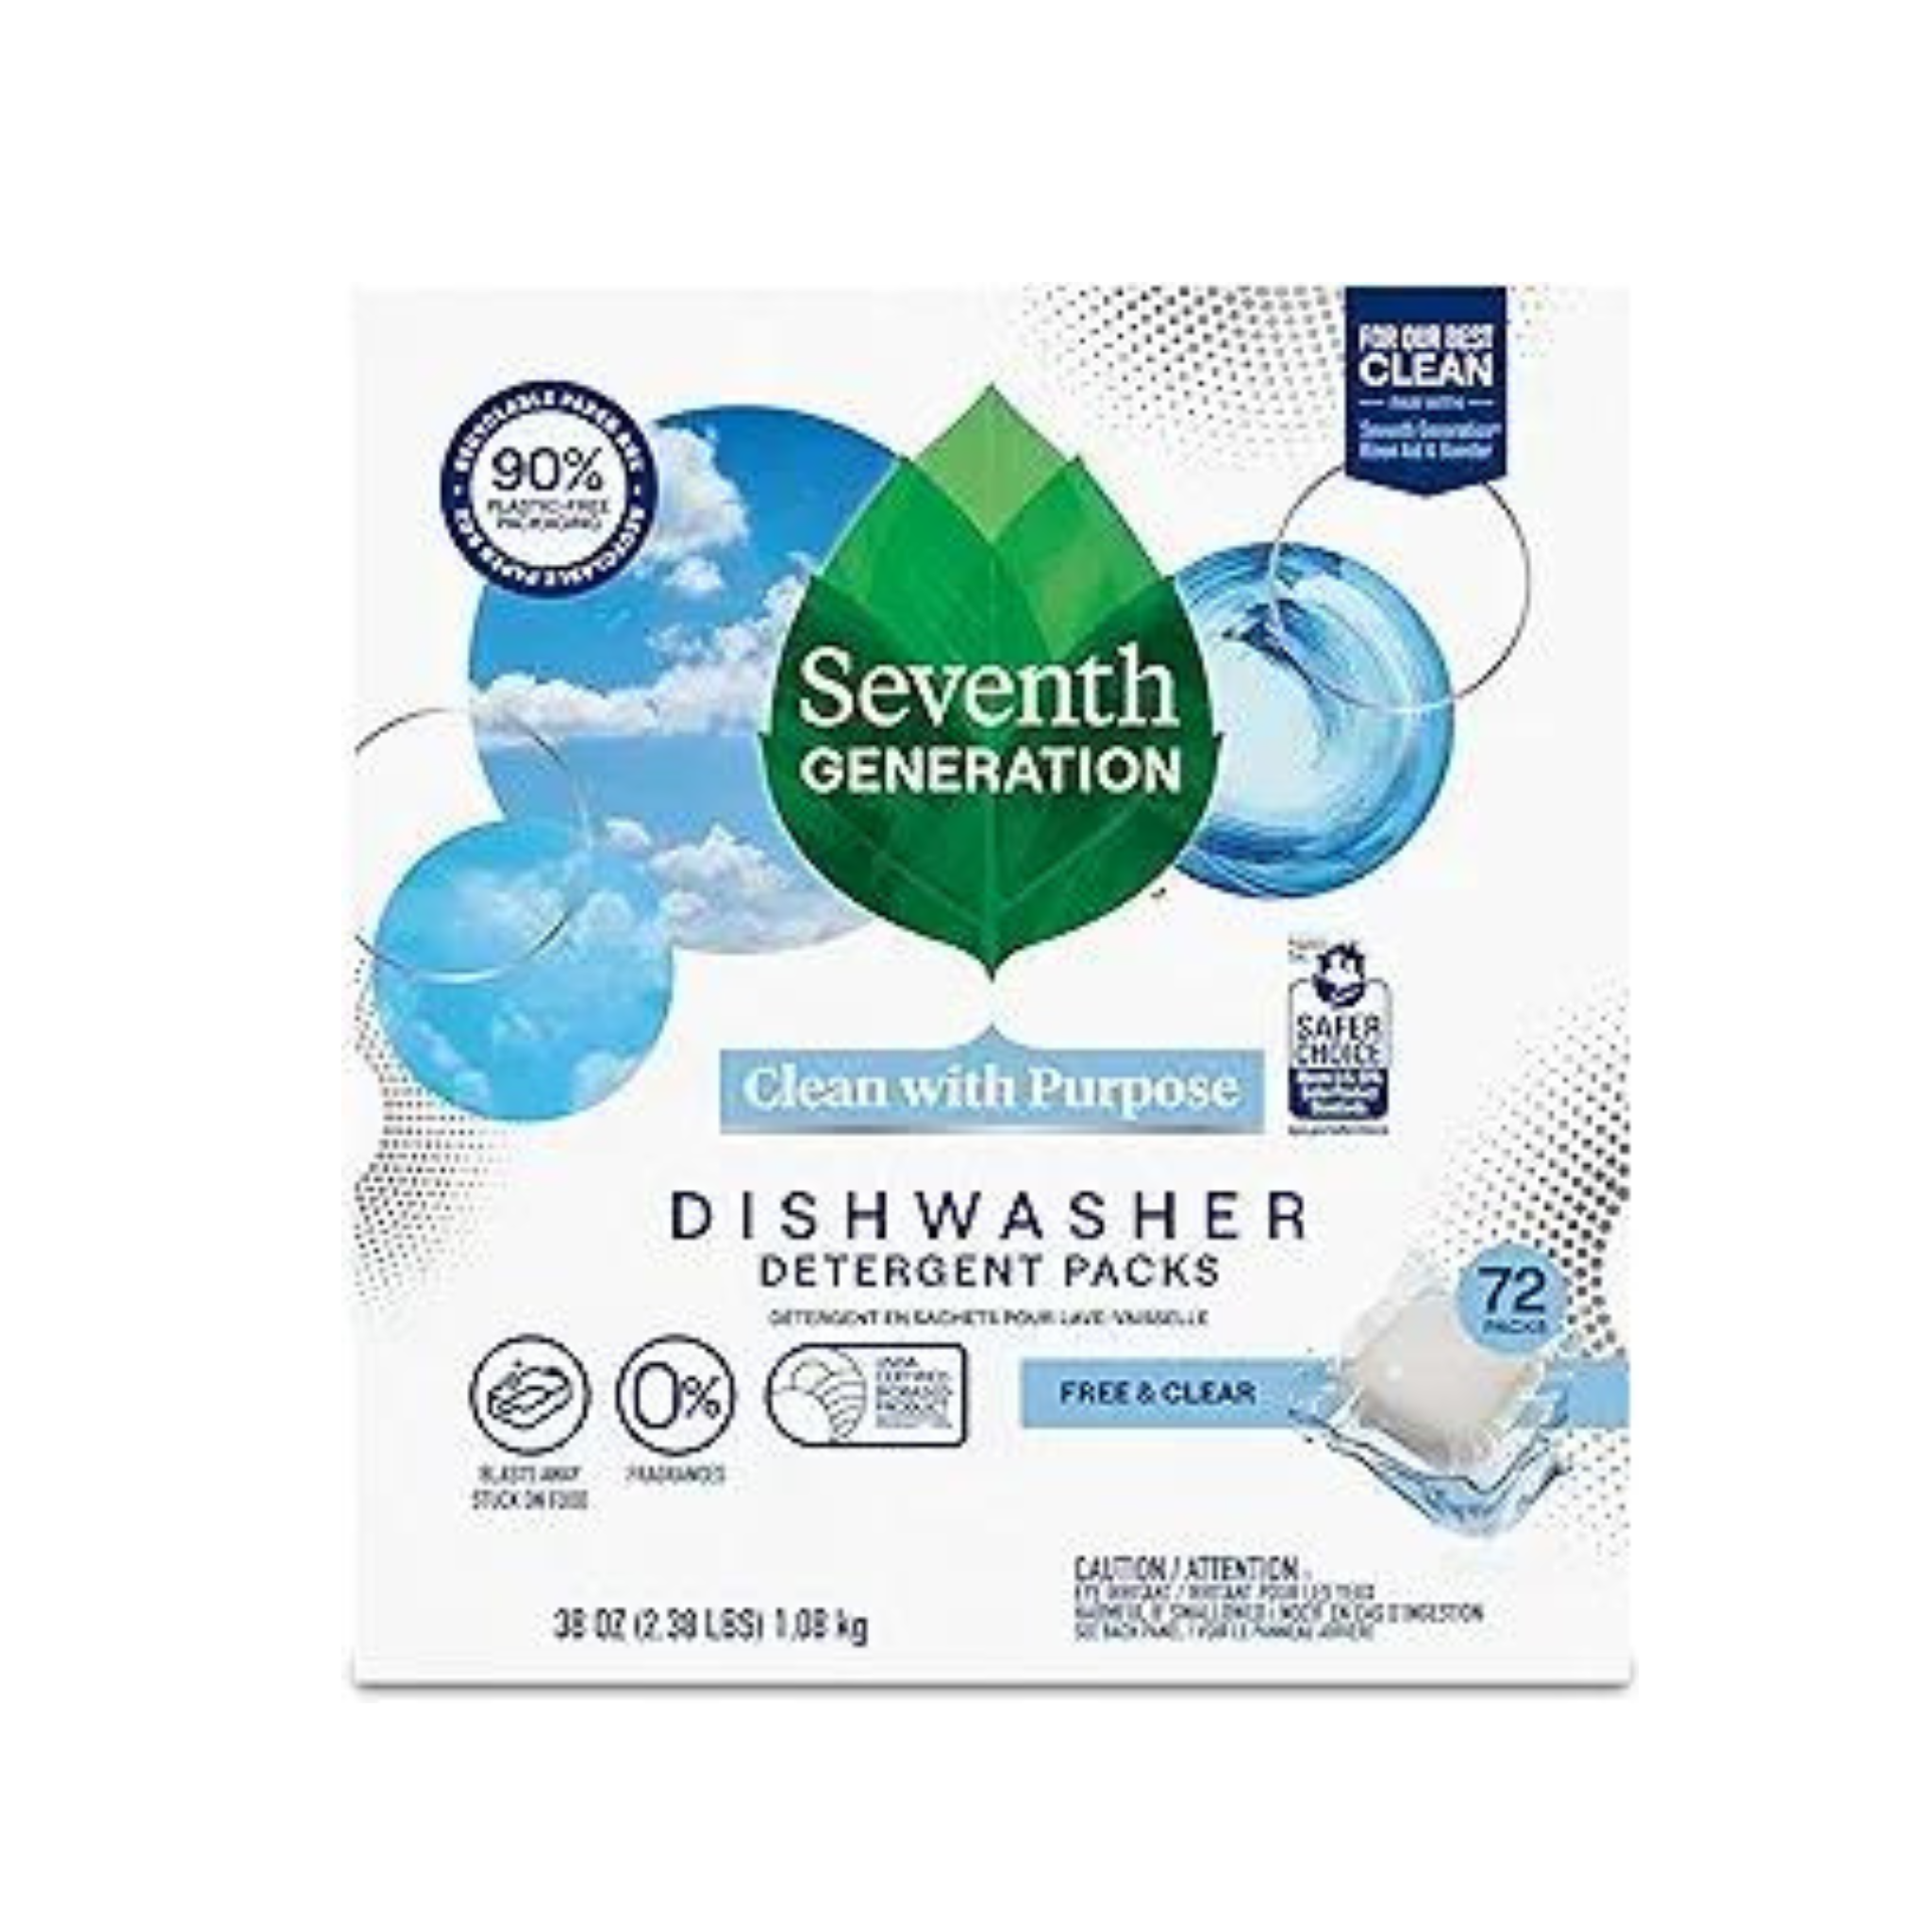 72-Count Seventh Generation Dishwasher Detergent Packs for sparkling dishes Free & Clear Dishwasher Tabs